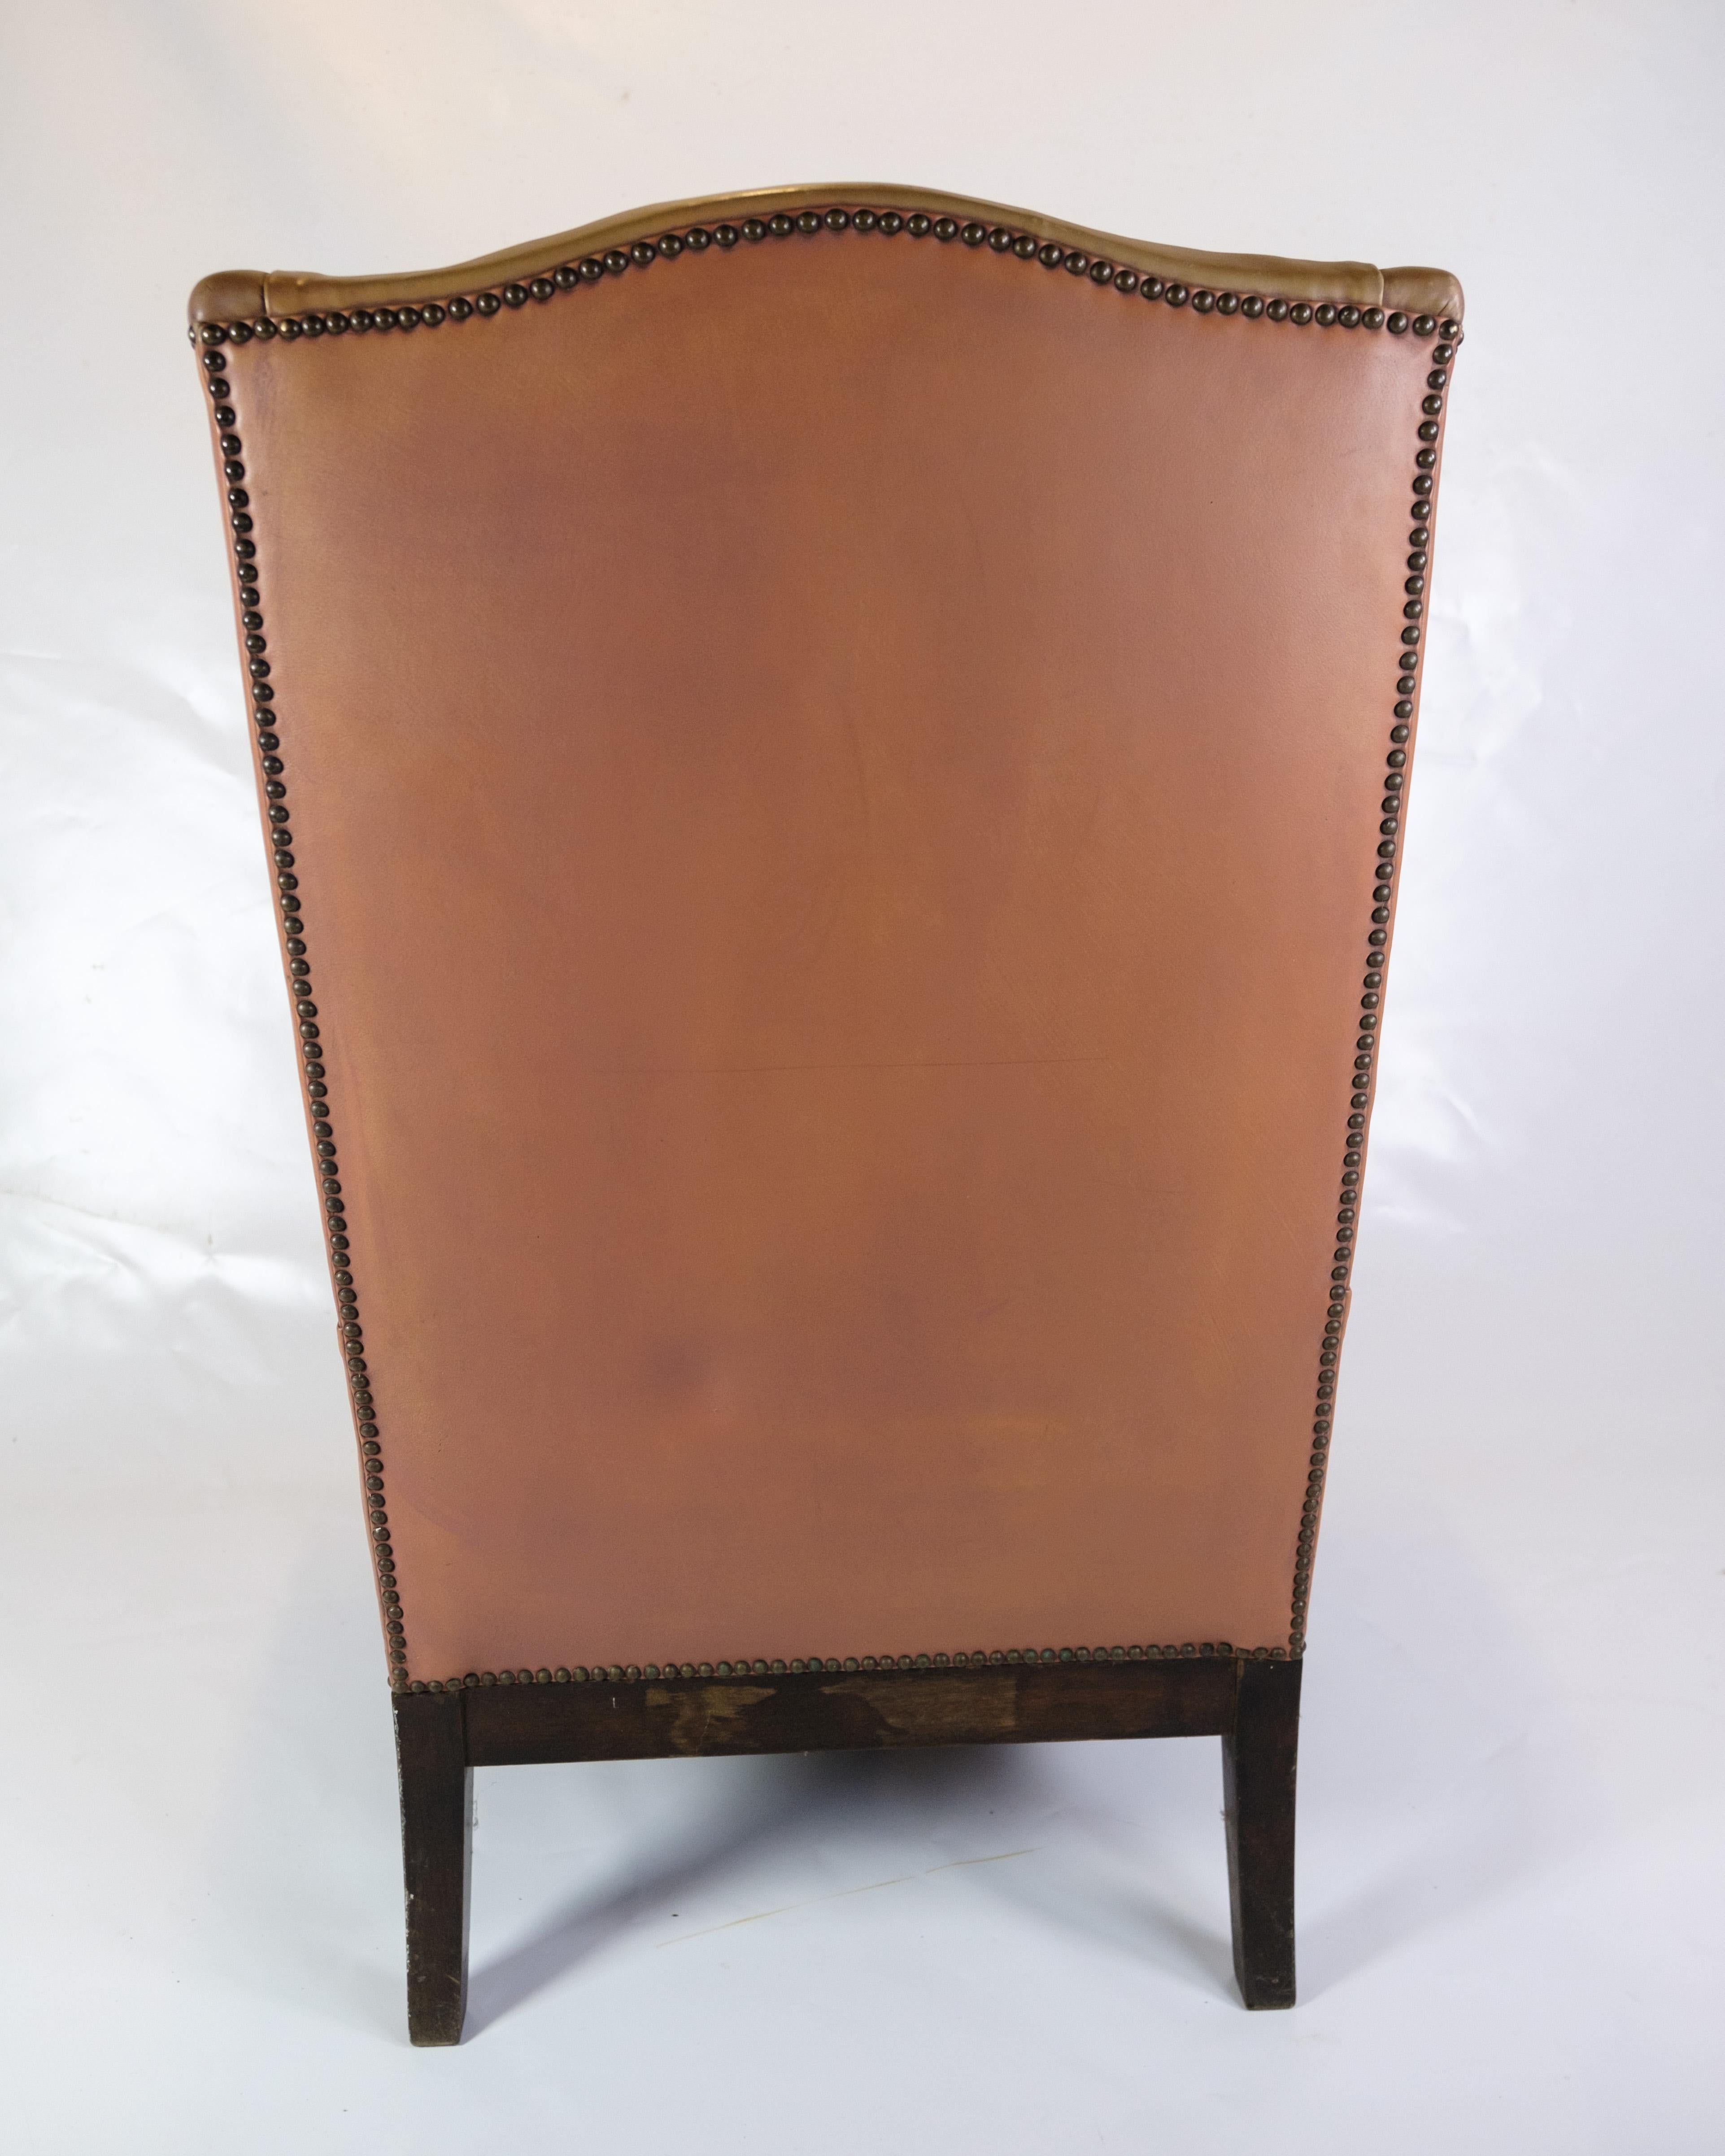 Antique High Flap Chair, Chesterfield Style Made In Brown Leather From 1920s In Good Condition For Sale In Lejre, DK